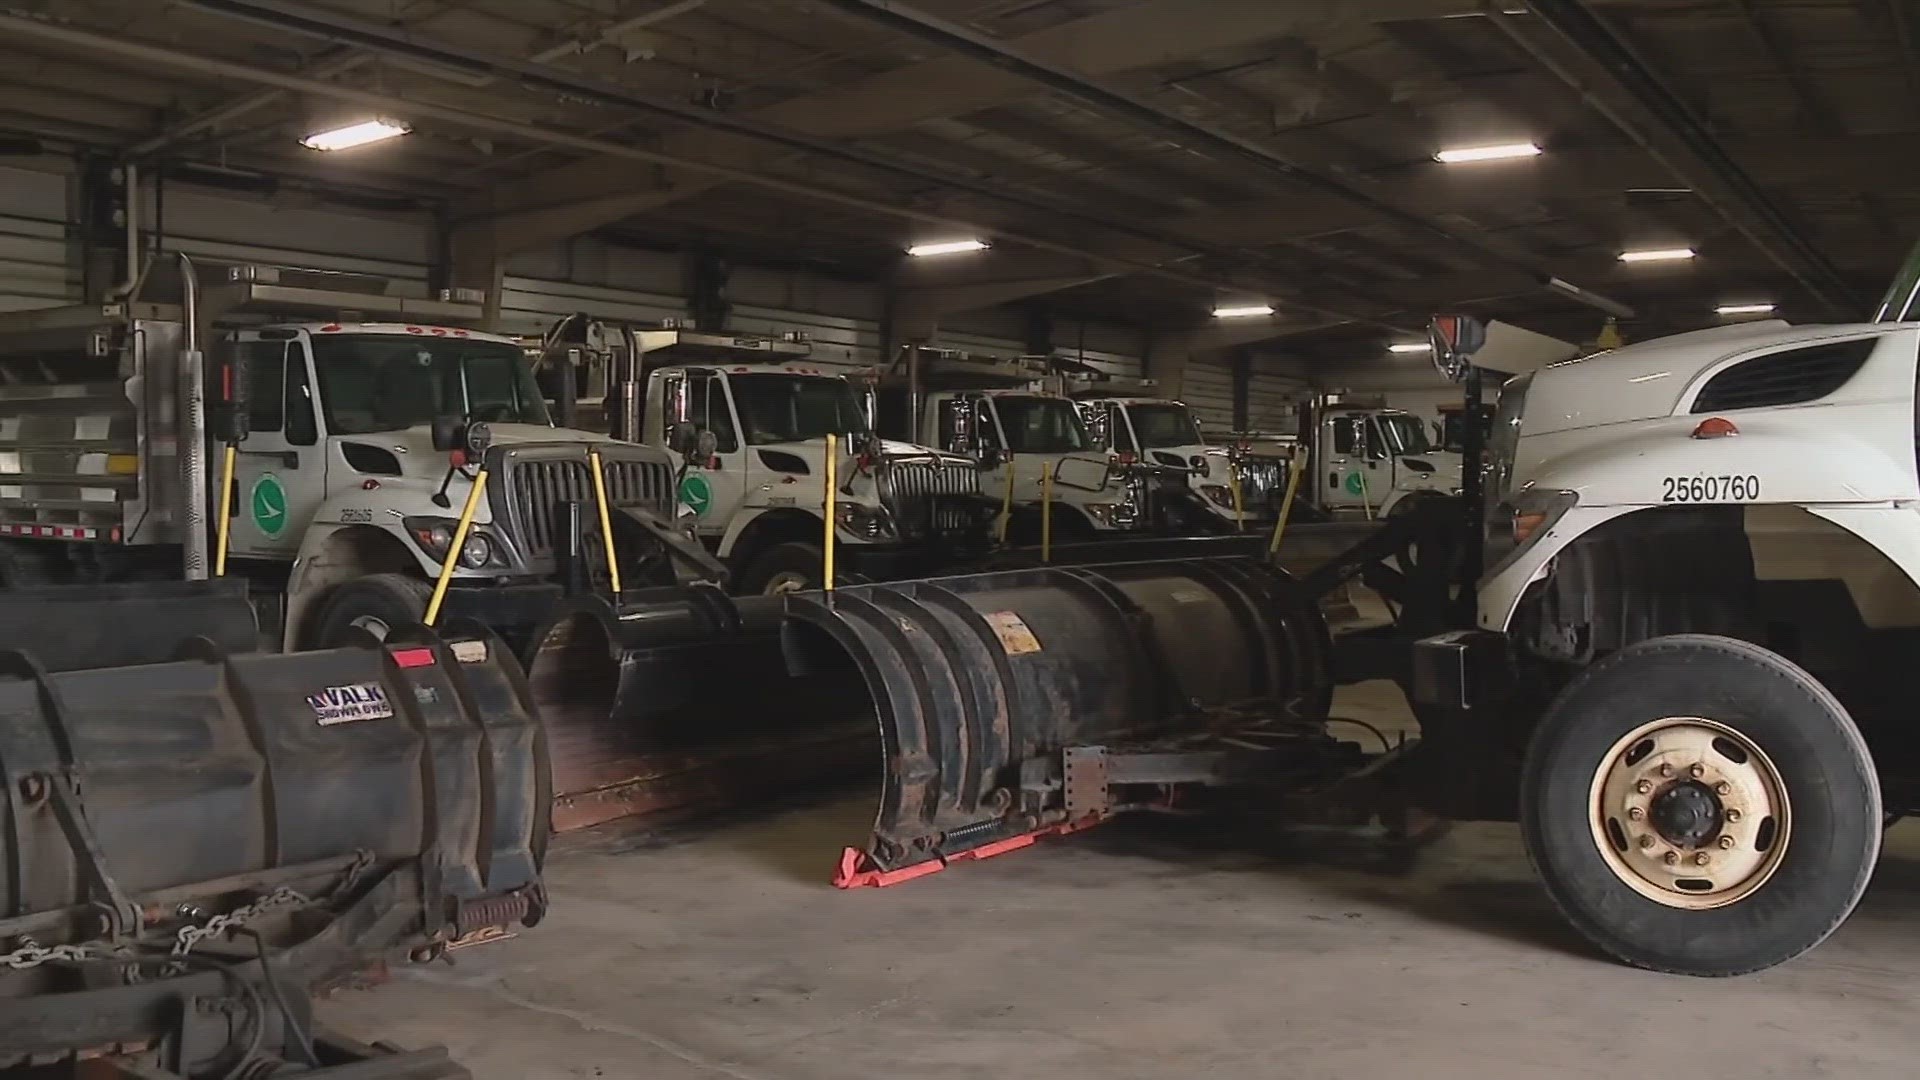 ODOT has been preparing early by pre-treating the roads and making sure their equipment is in check.